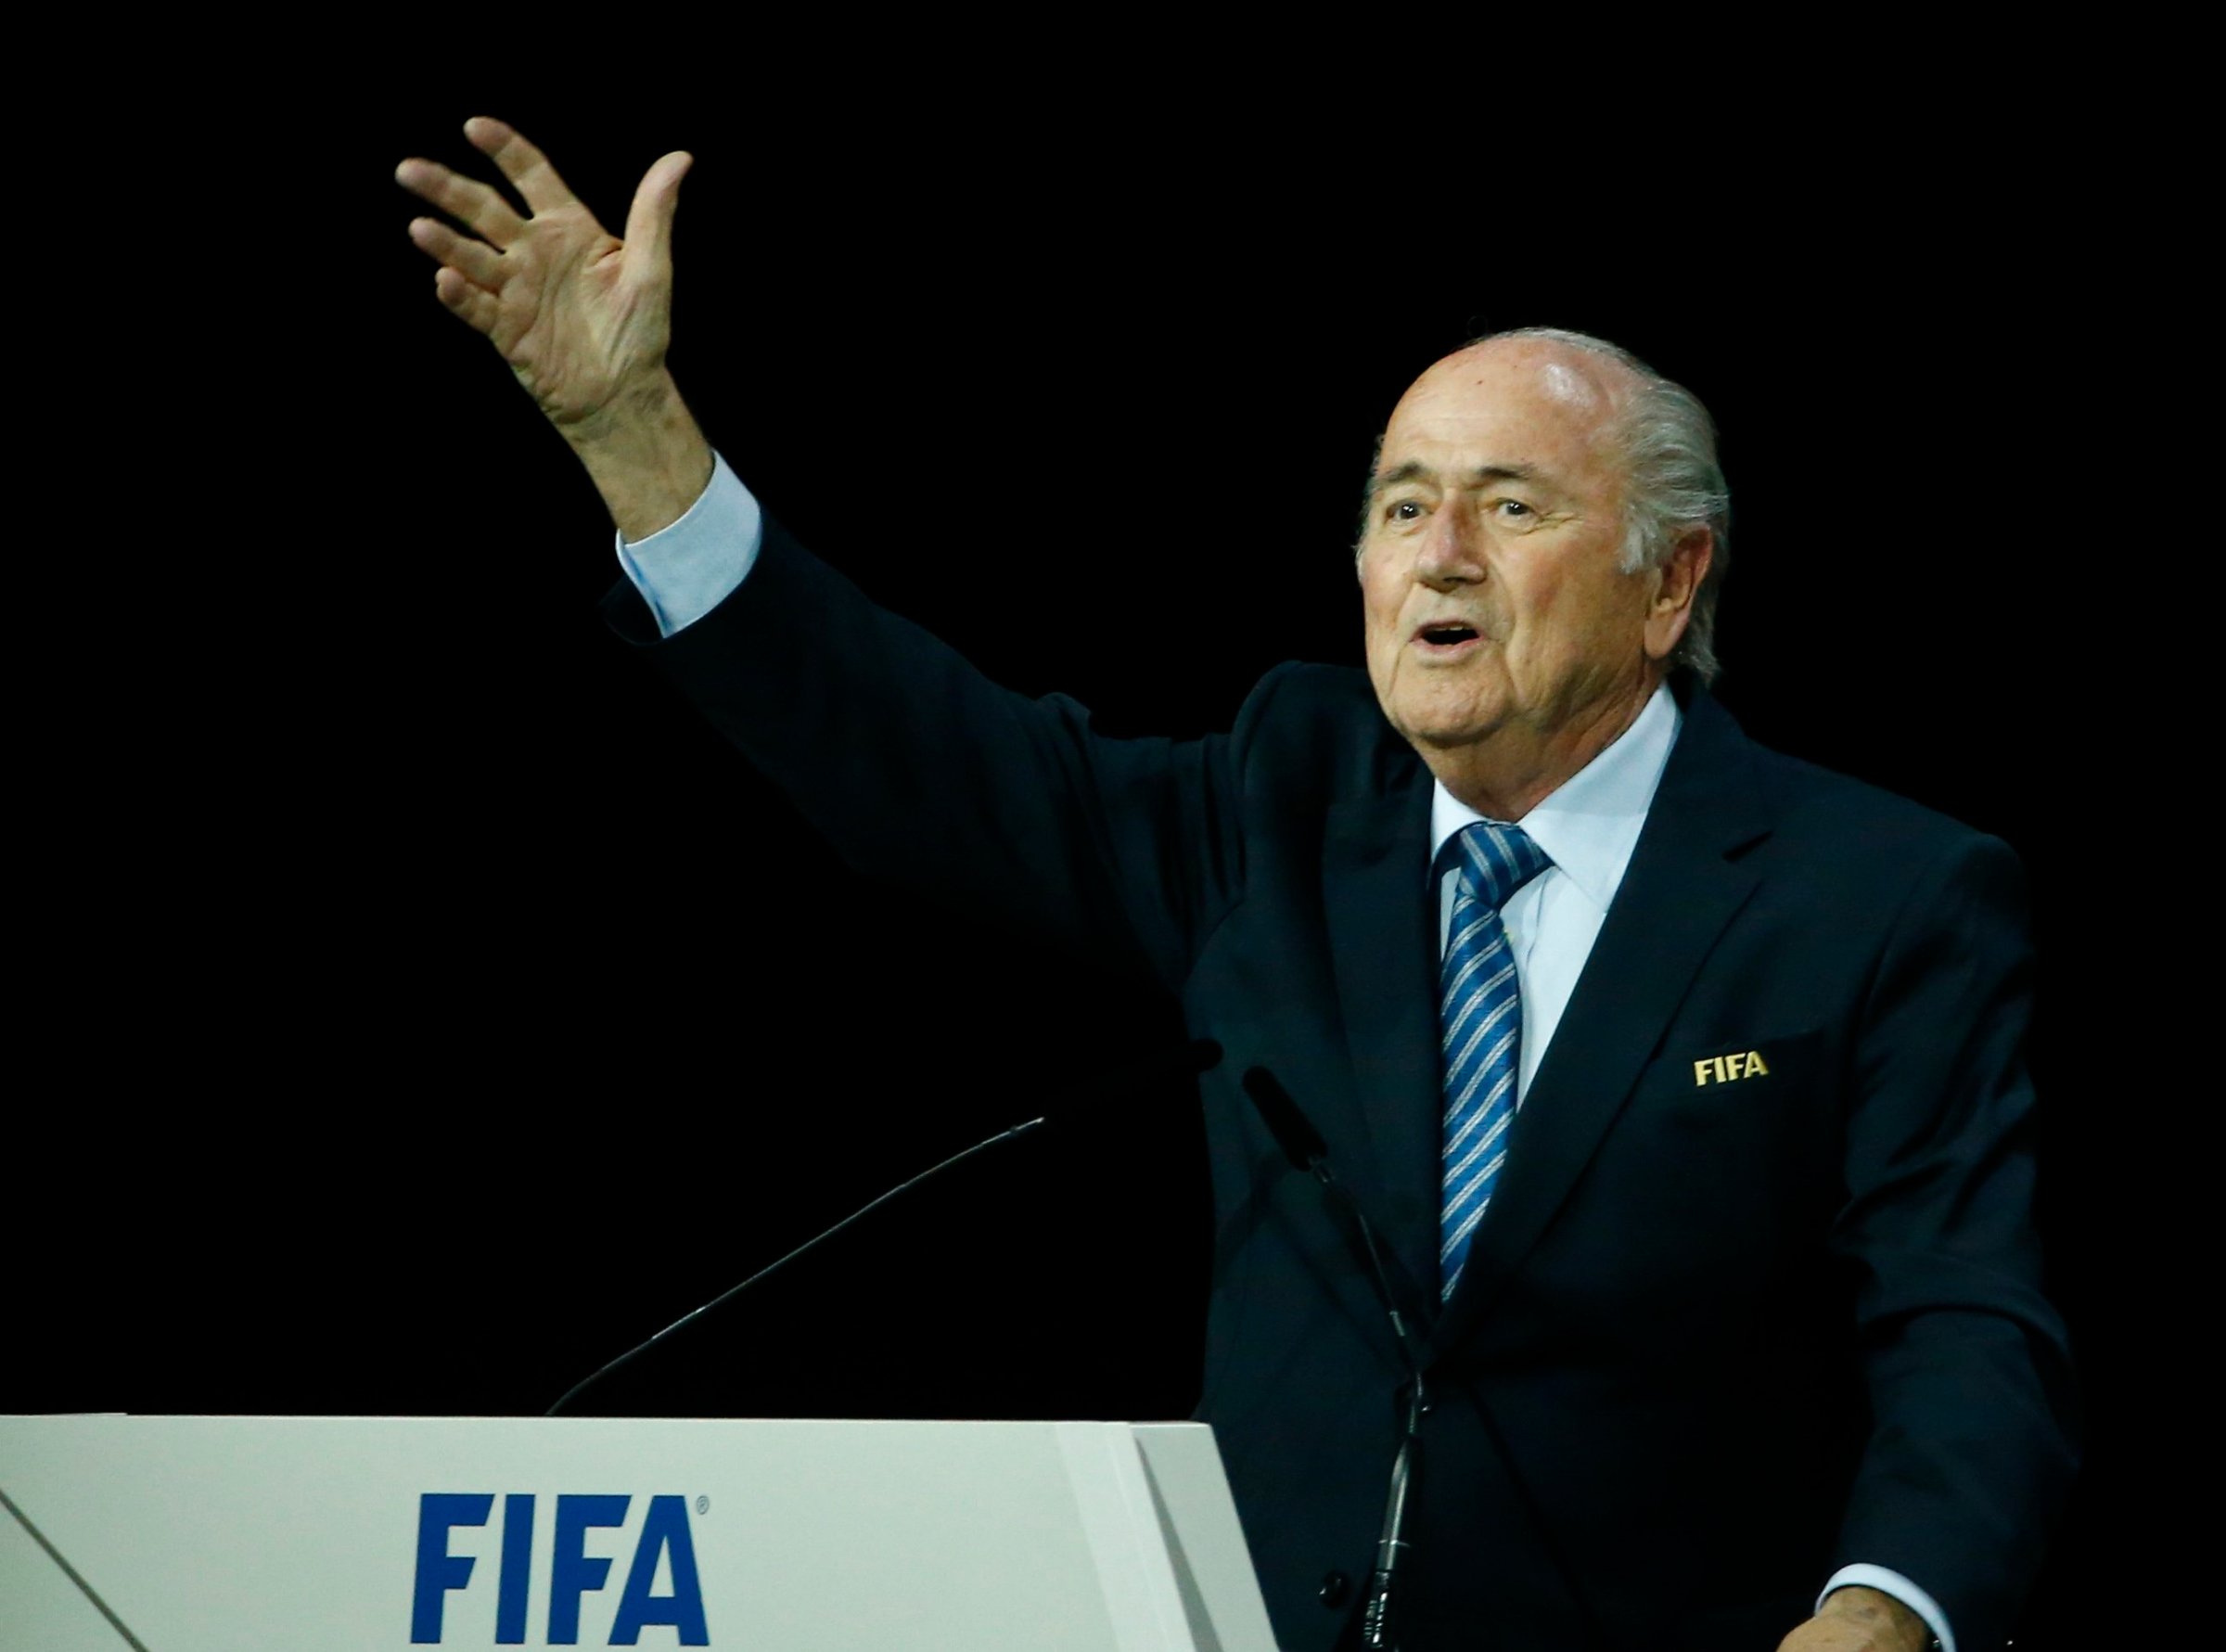 FIFA President Sepp Blatter speaks after he was re-elected at the 65th FIFA Congress in Zurich on May 29, 2015.